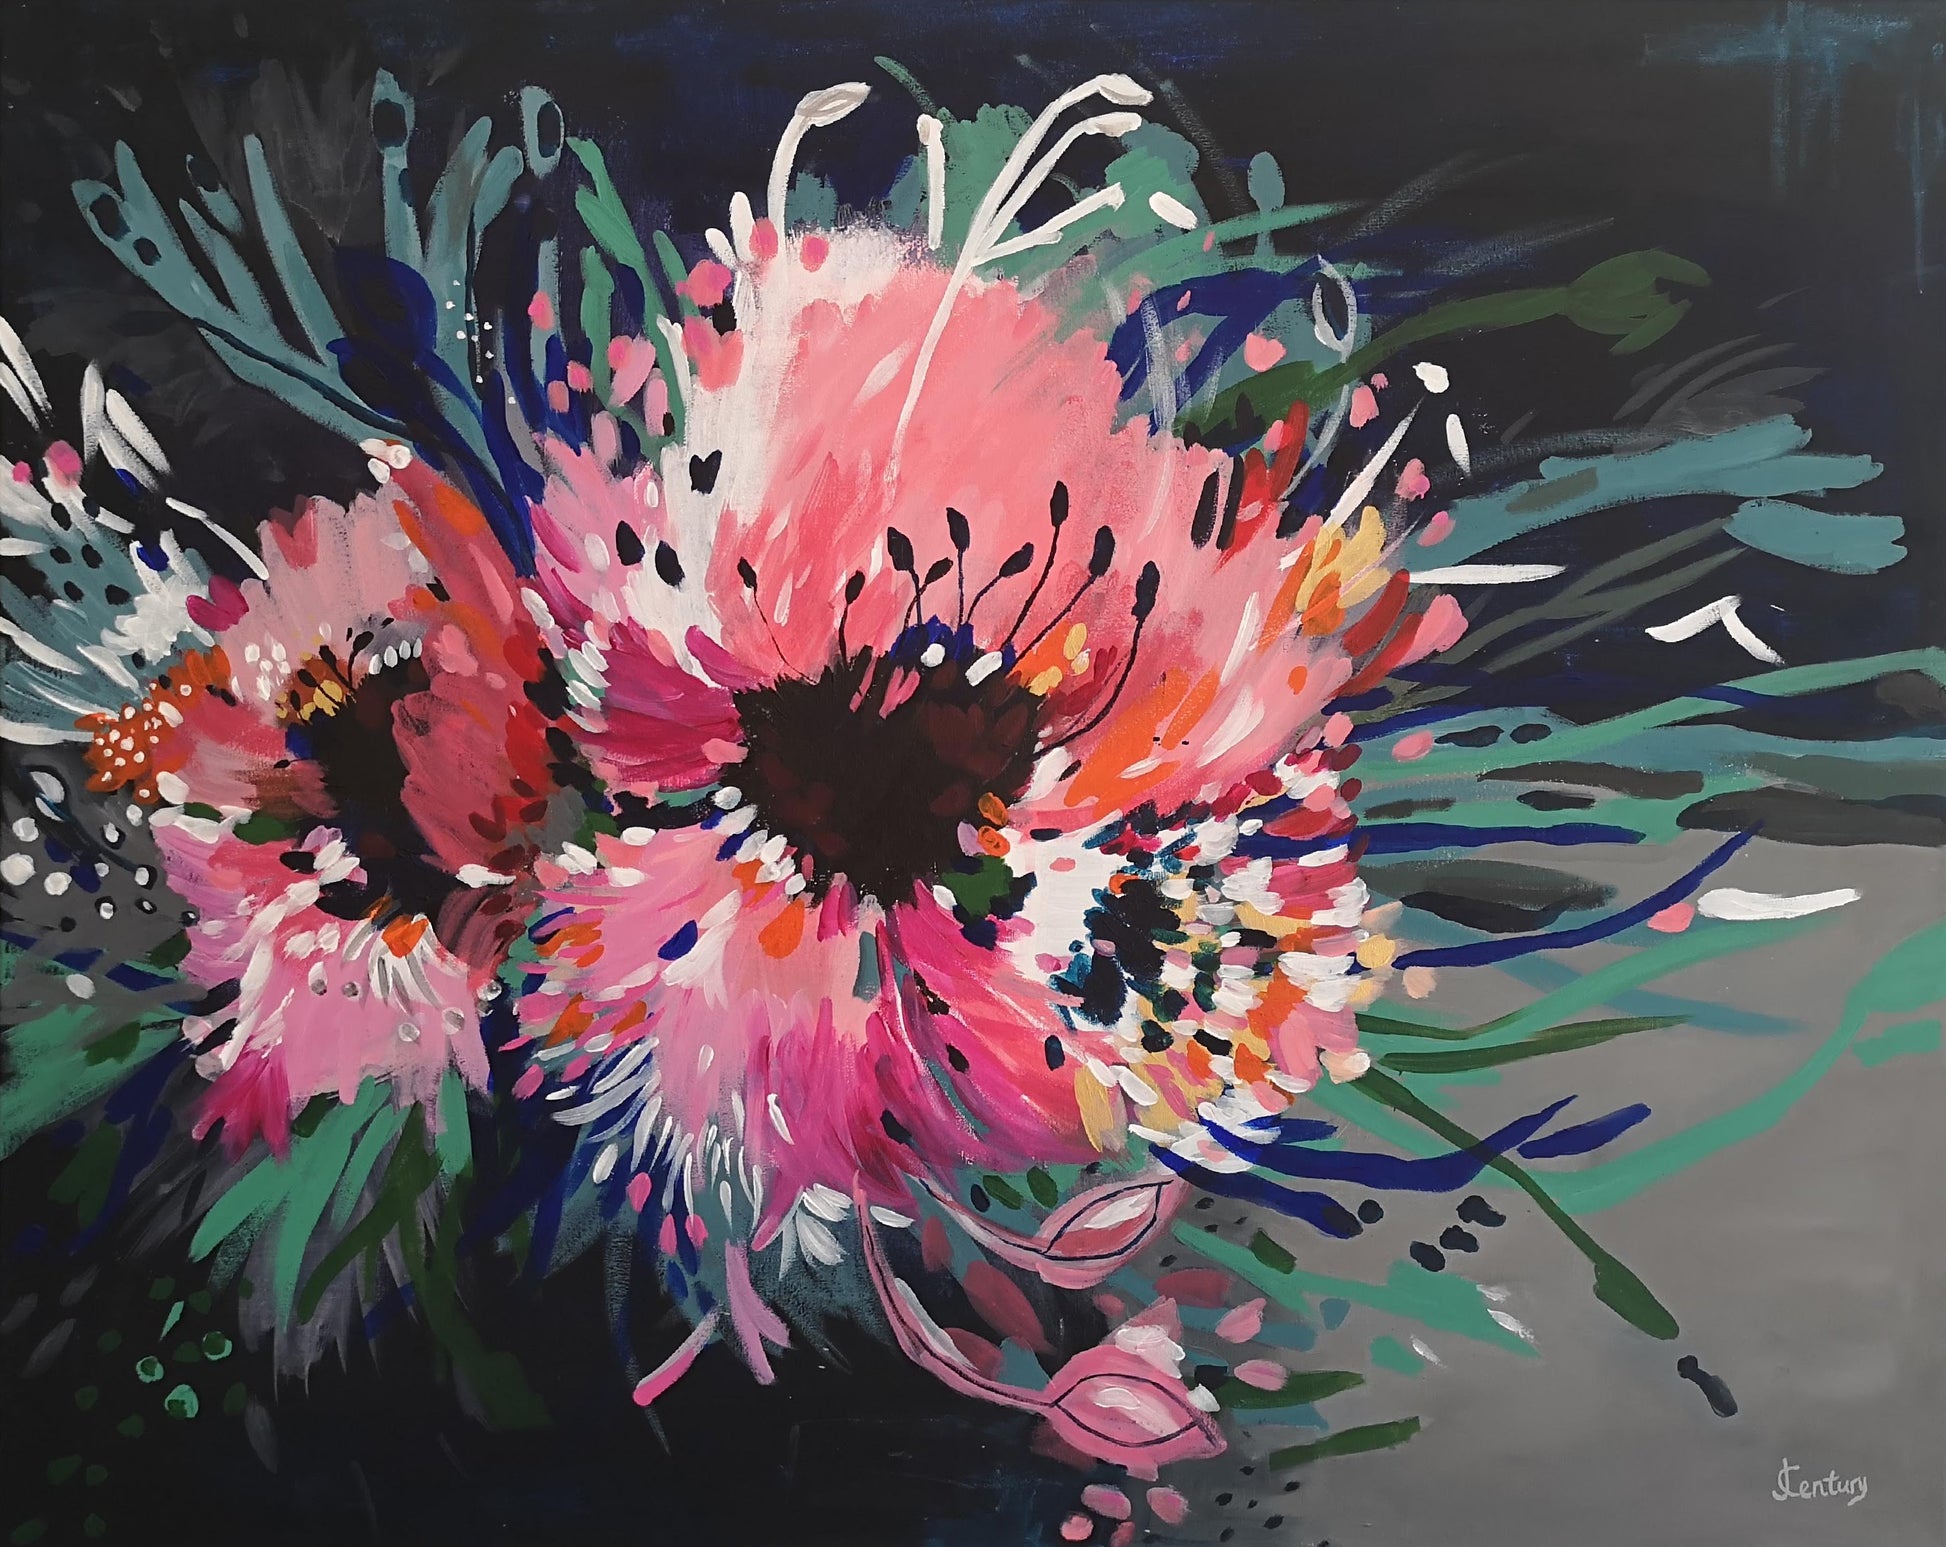 Abstract Flower Painting featuring two large bold pink blooms bursting on the page, with contrasting lines of blue, green and white extending out to add movement. Vibrant, bold and colourful original painting by Judy Century.